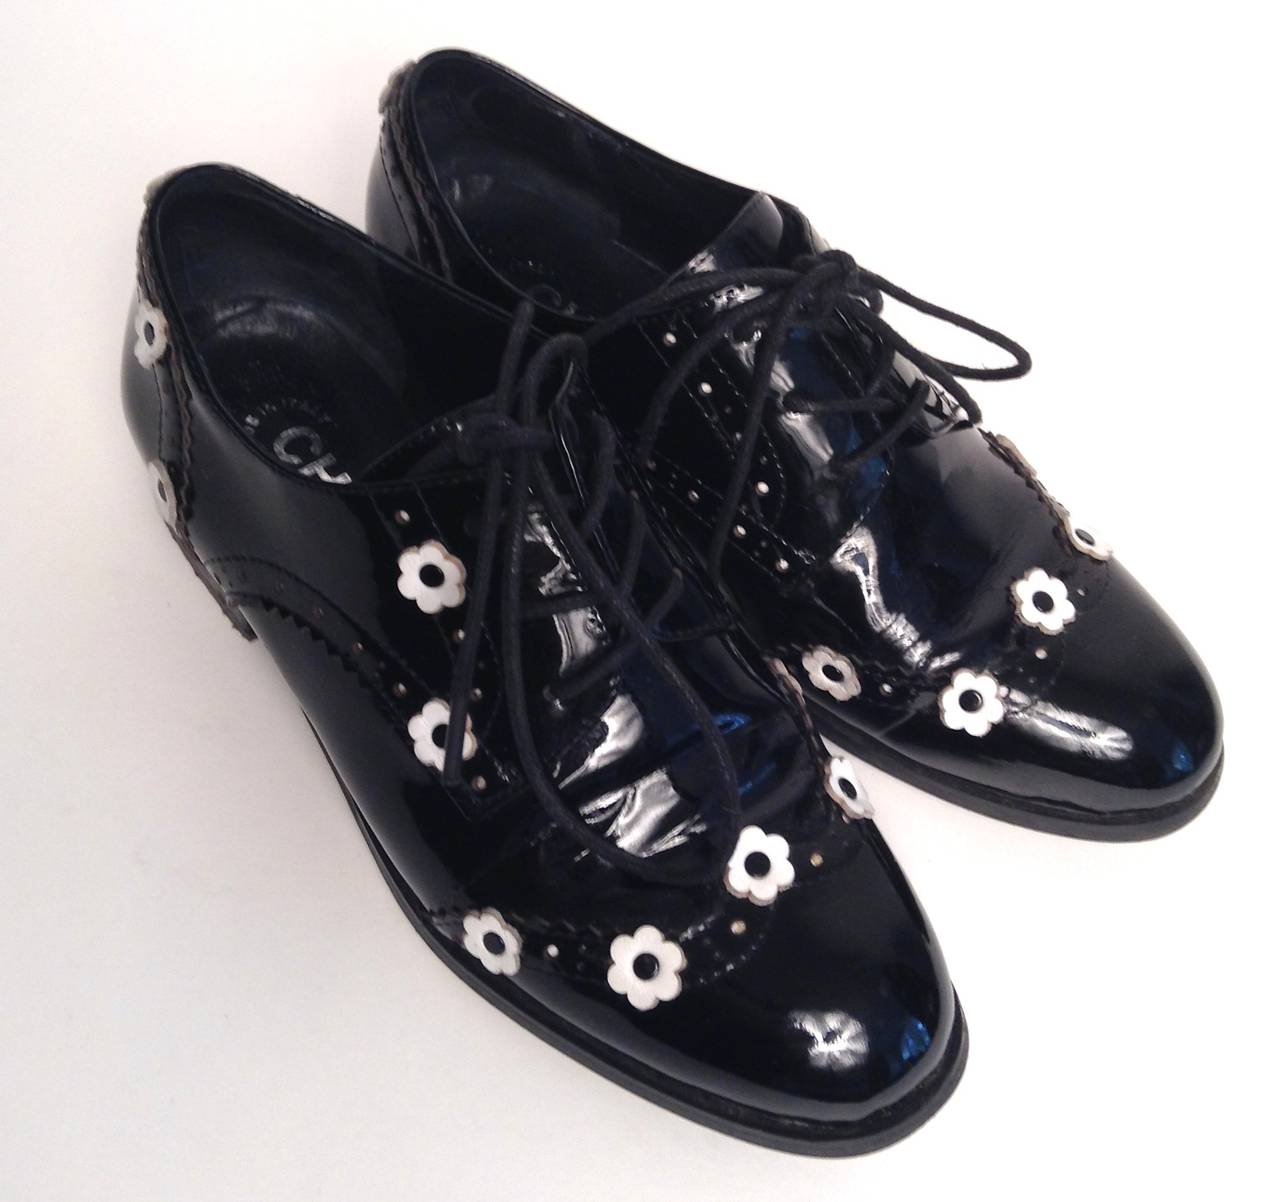 Women's Chanel Black Patent Oxfords with Daisies Size 5